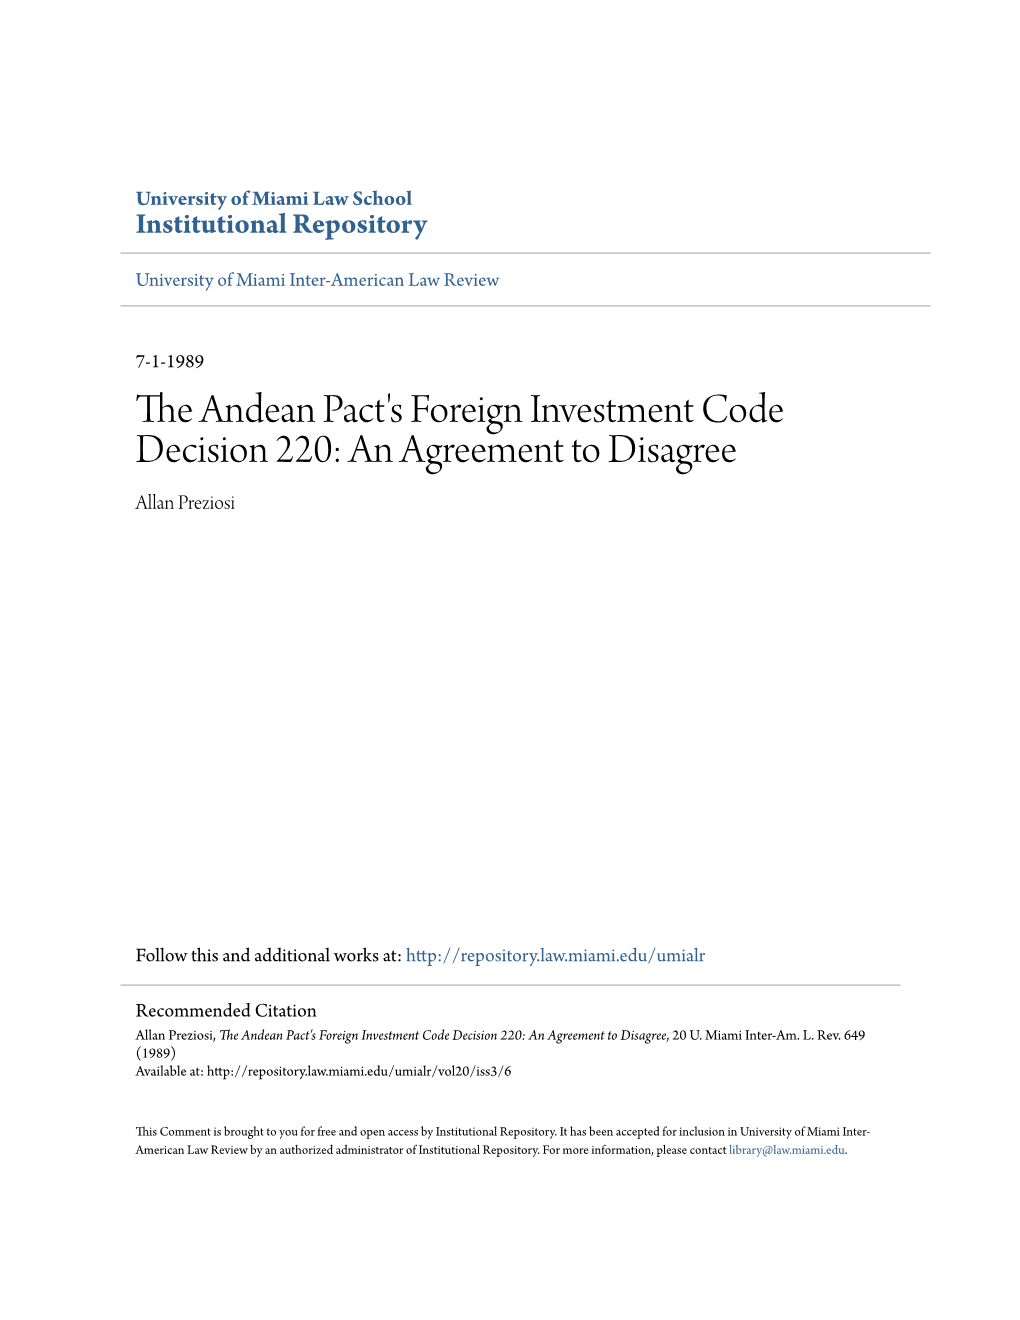 The Andean Pact's Foreign Investment Code Decision 220: an Agreement to Disagree Allan Preziosi